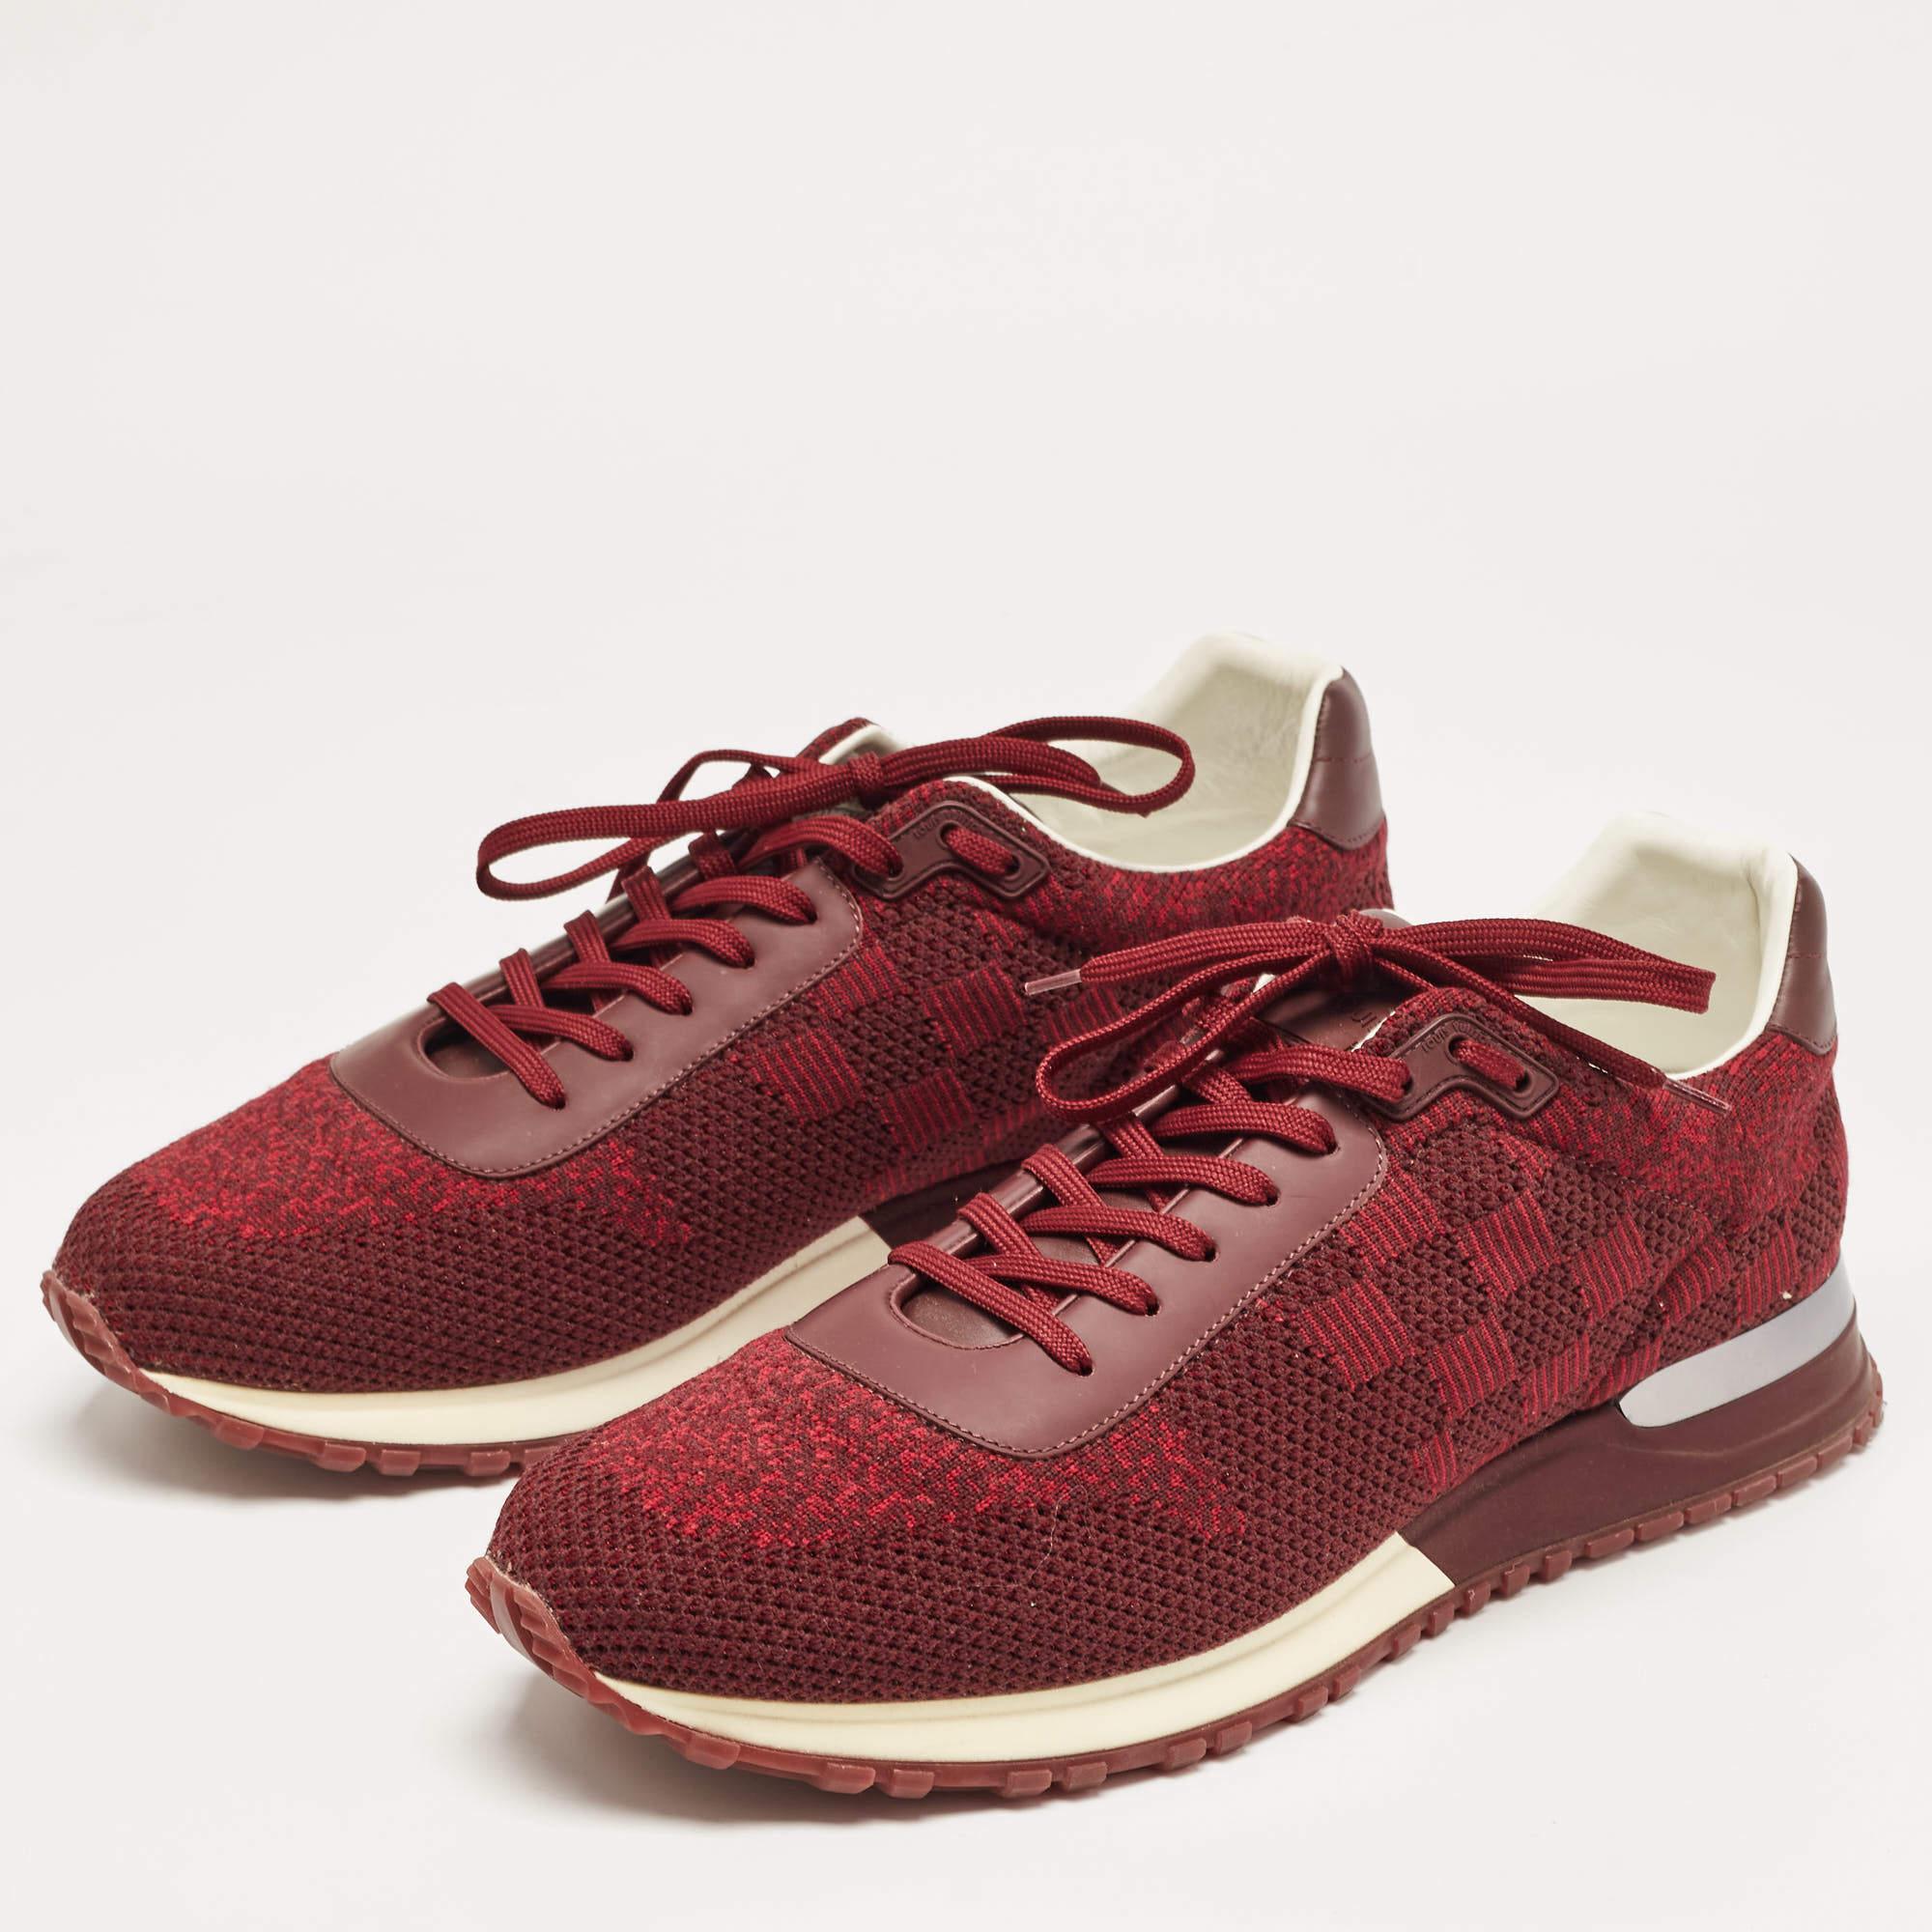 Brown Louis Vuitton Burgundy Knit Fabric and Leather Run Away Sneakers Size 42.5